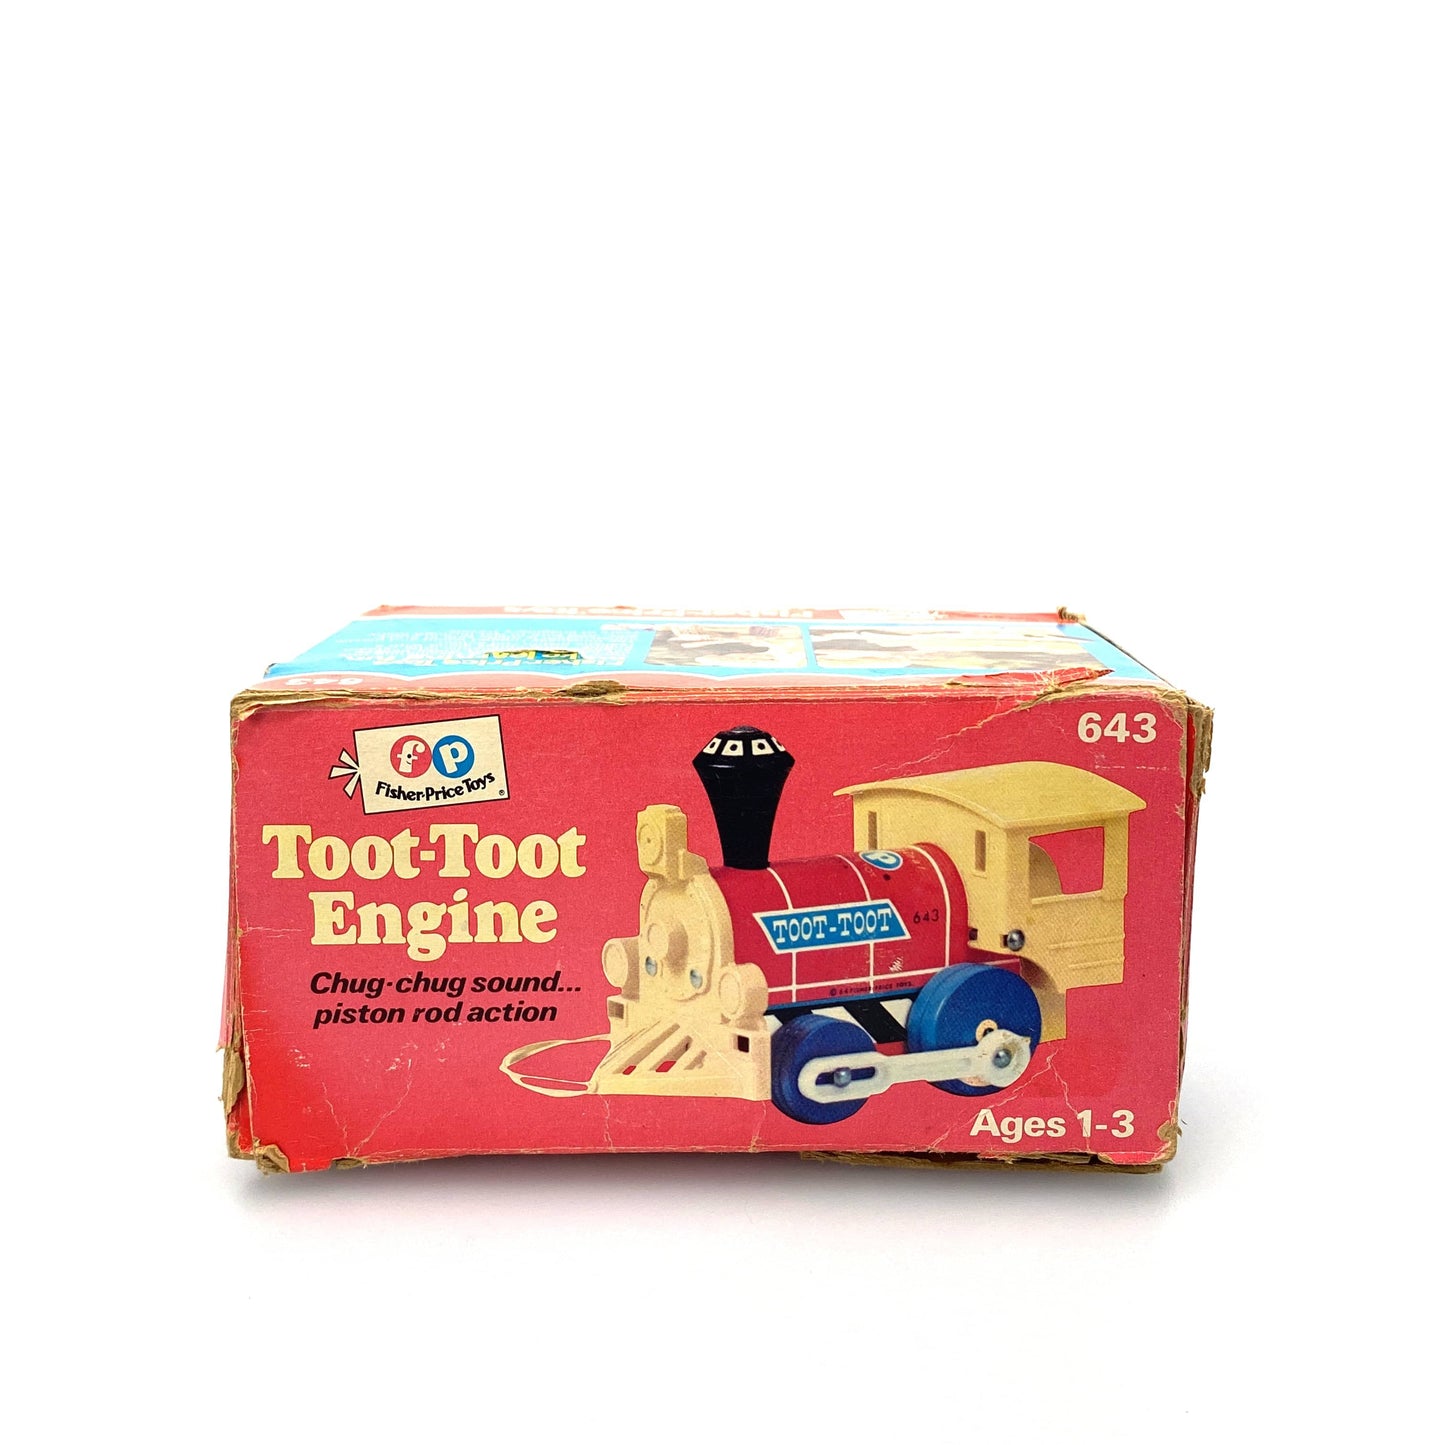 Vintage Fisher Price Toot Toot Engine Toy 643 1972 w/Box